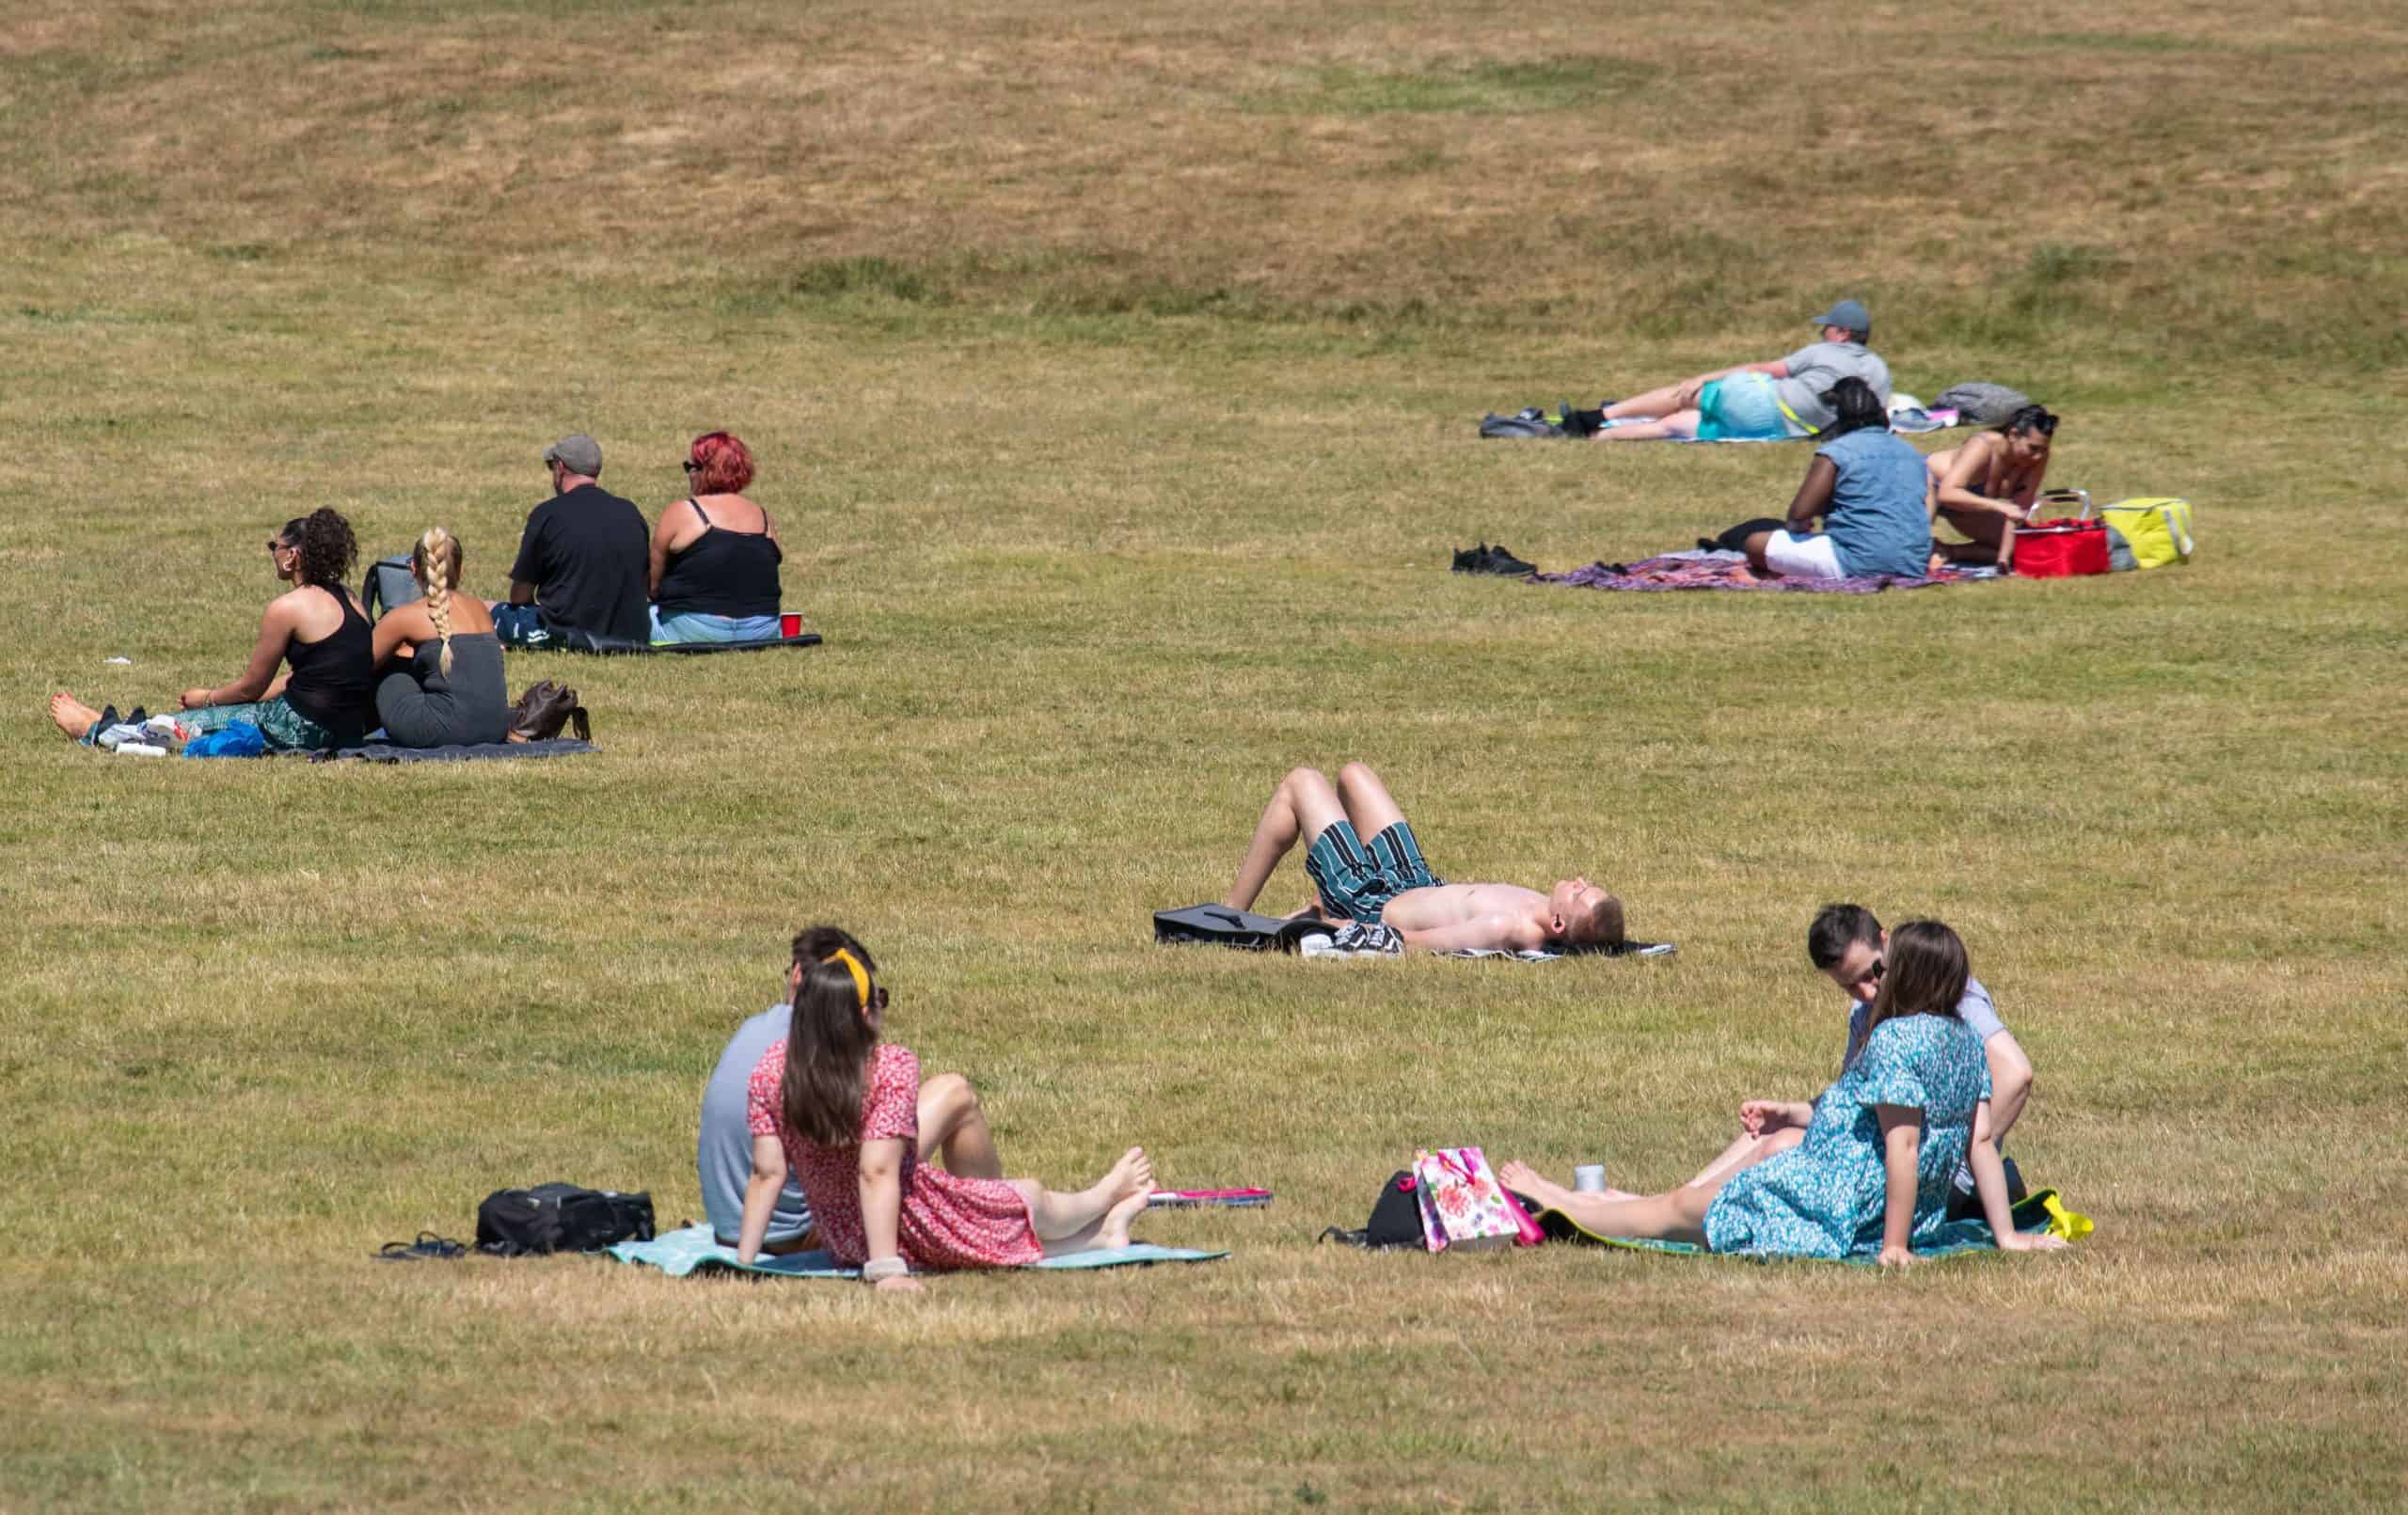 Record-high March temperatures forecast as lockdown eases